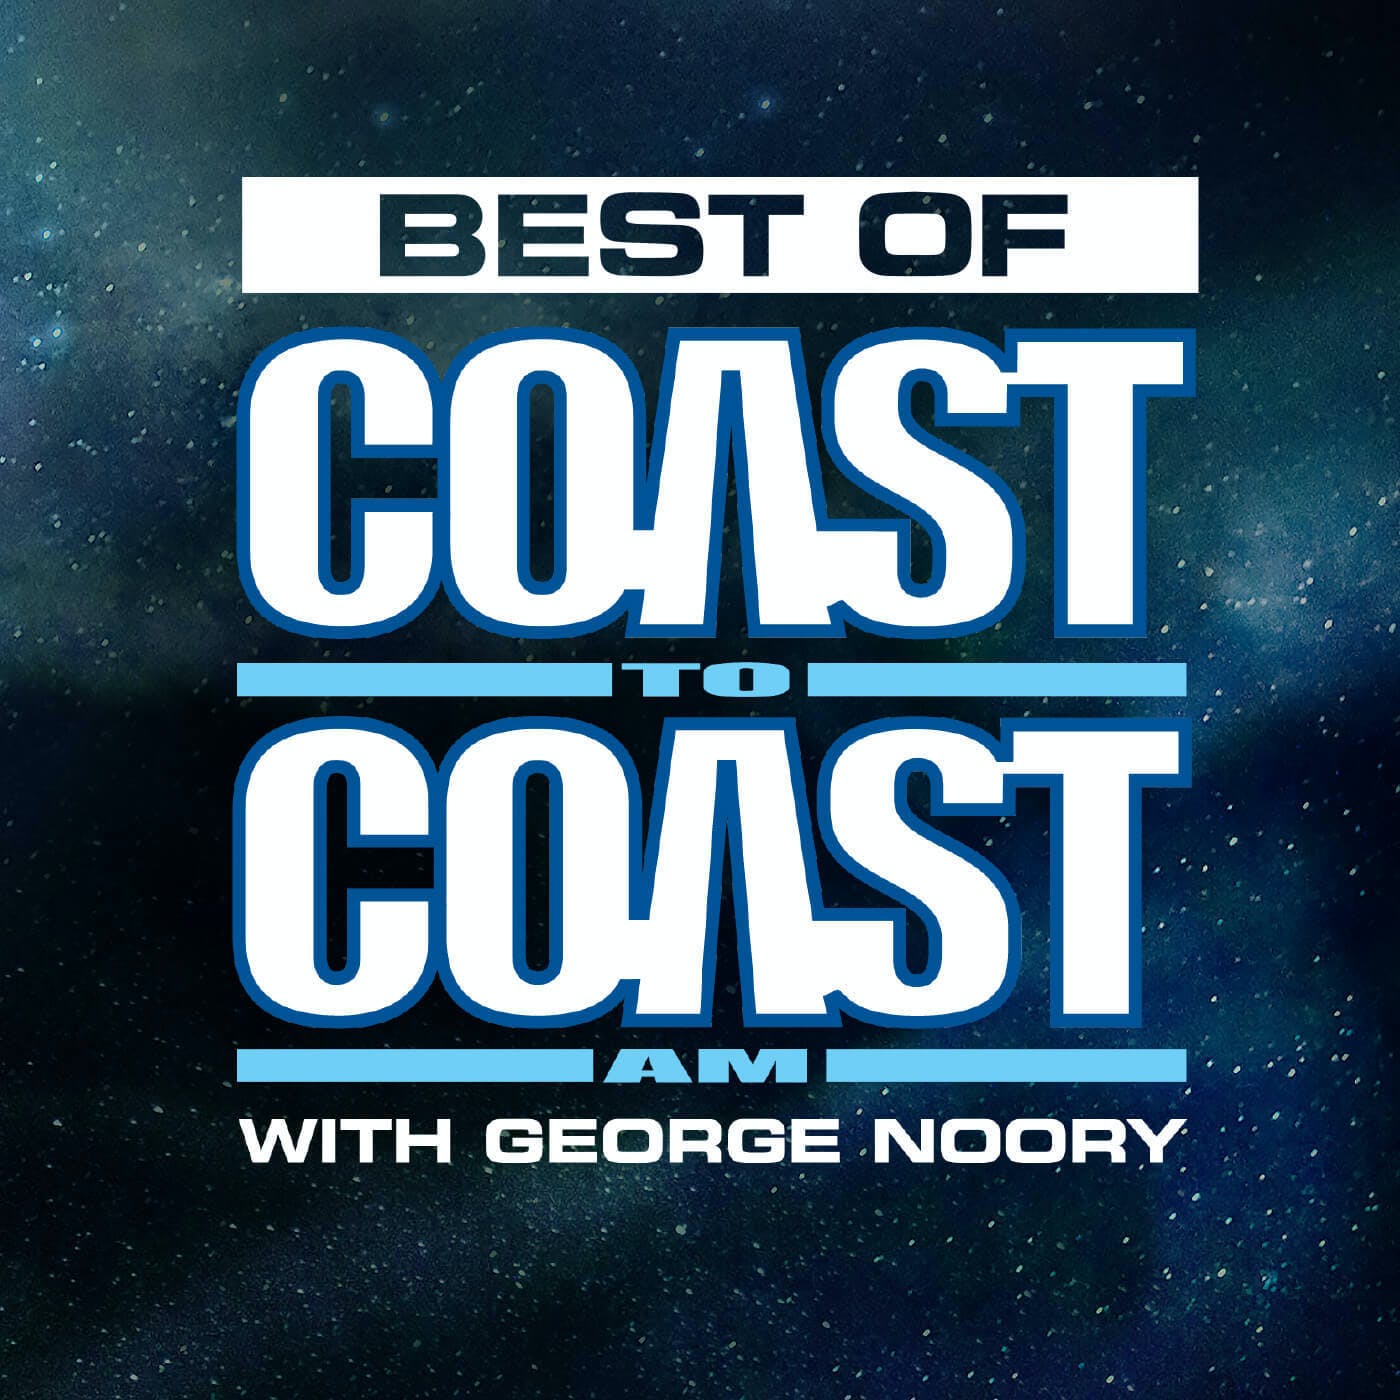 Science Fiction - Best of Coast to Coast AM - 10/1/21